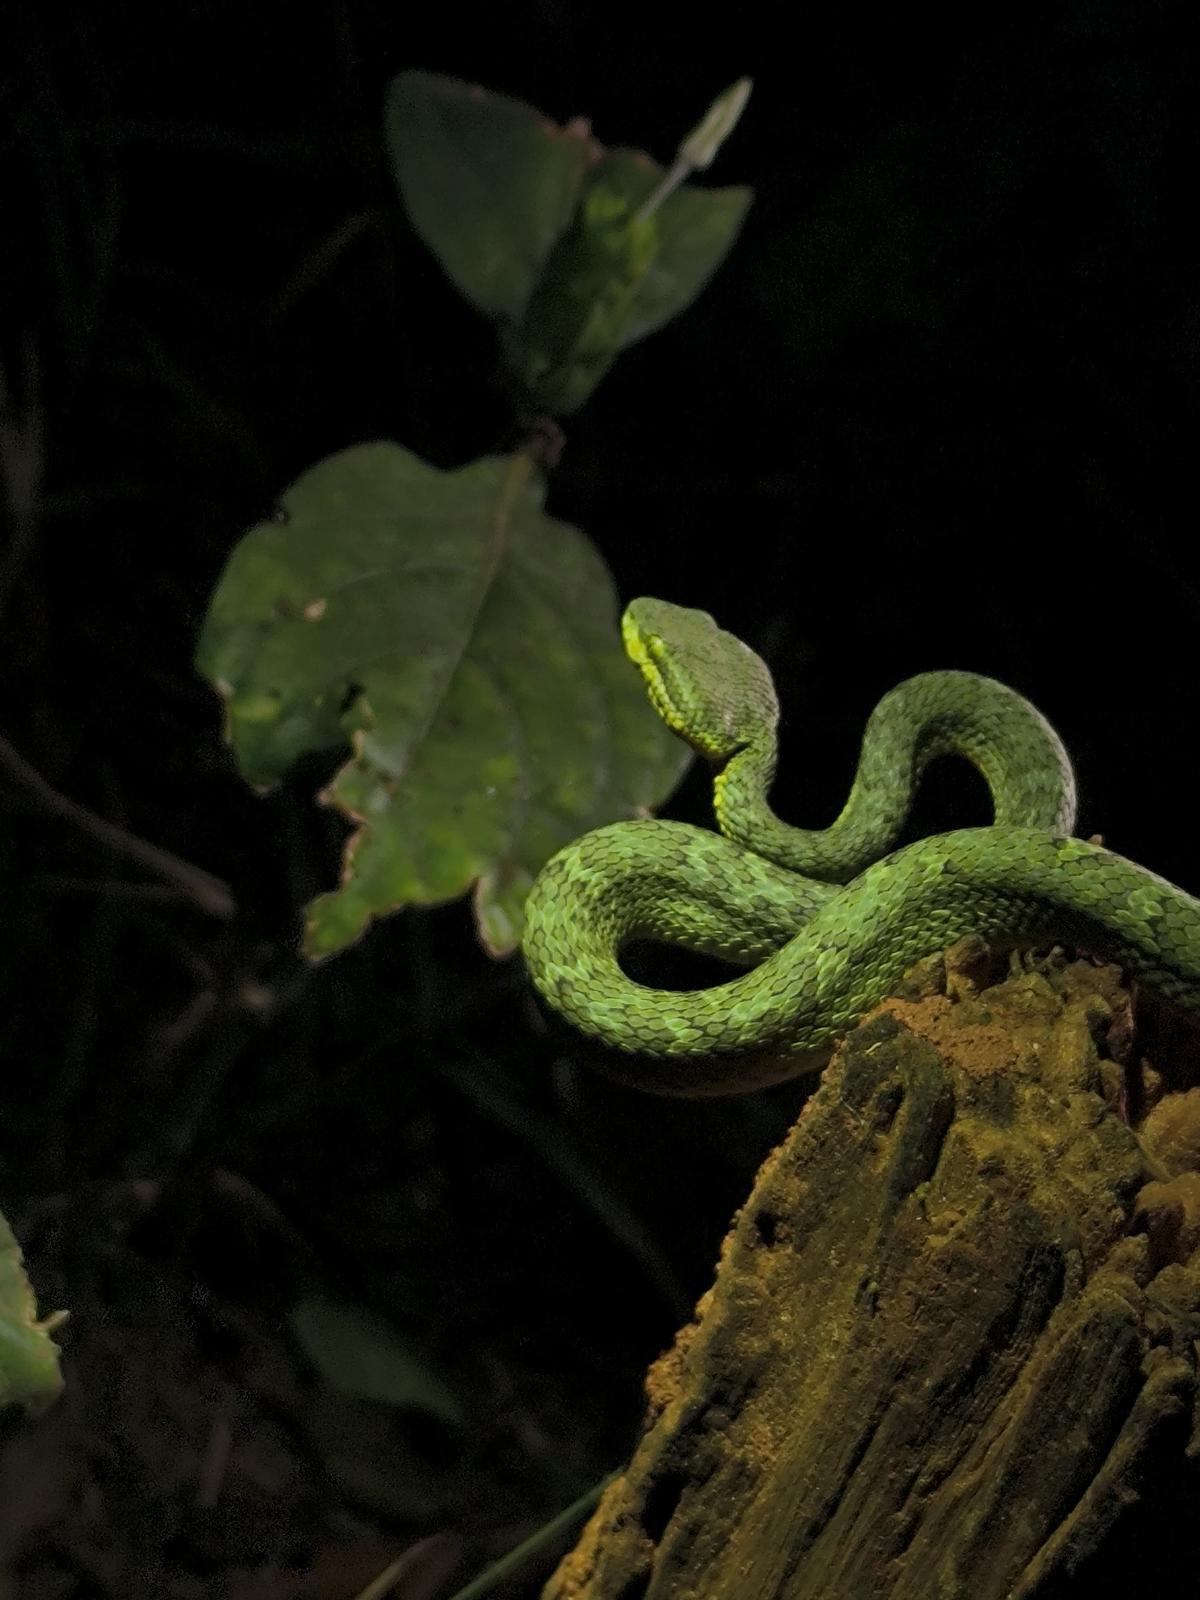 Common bamboo viper spotted during a herp walk in Visakhapatnam.